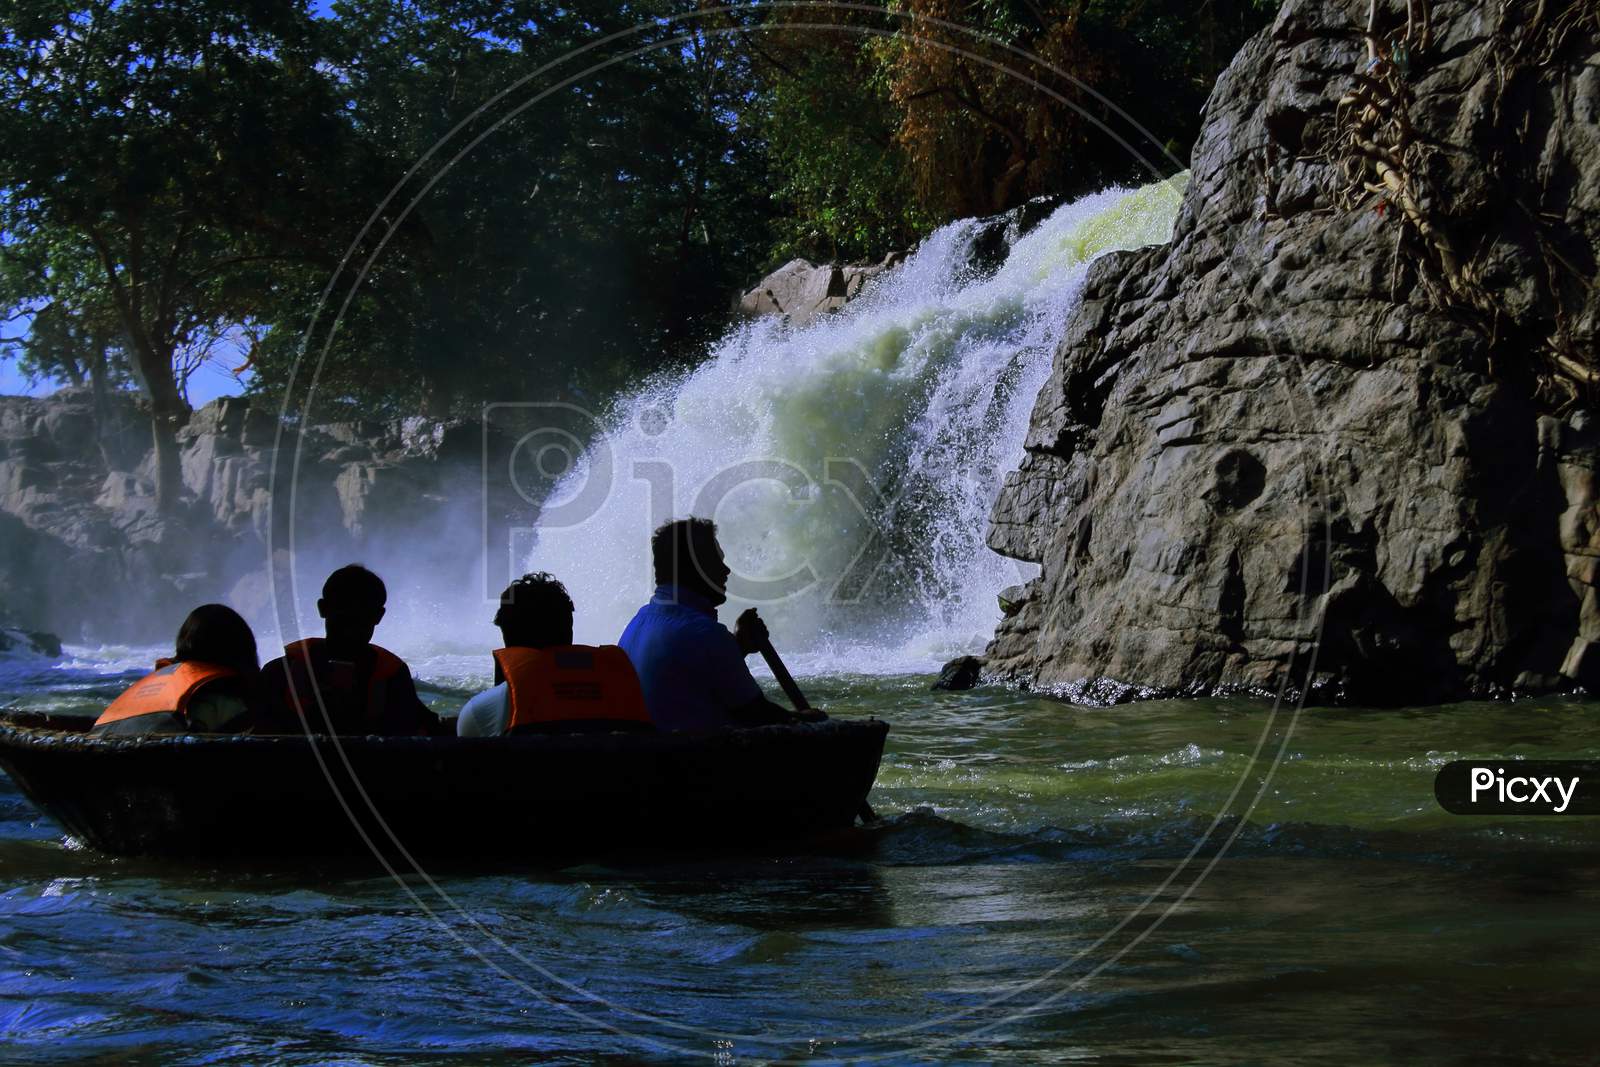 tourists are enjoying coracle ride on kaveri river in front of hogenakkal waterfalls. the beautiful waterfalls is located at the foothills of western ghats mountain range on the border between karnataka and tamilnadu, india